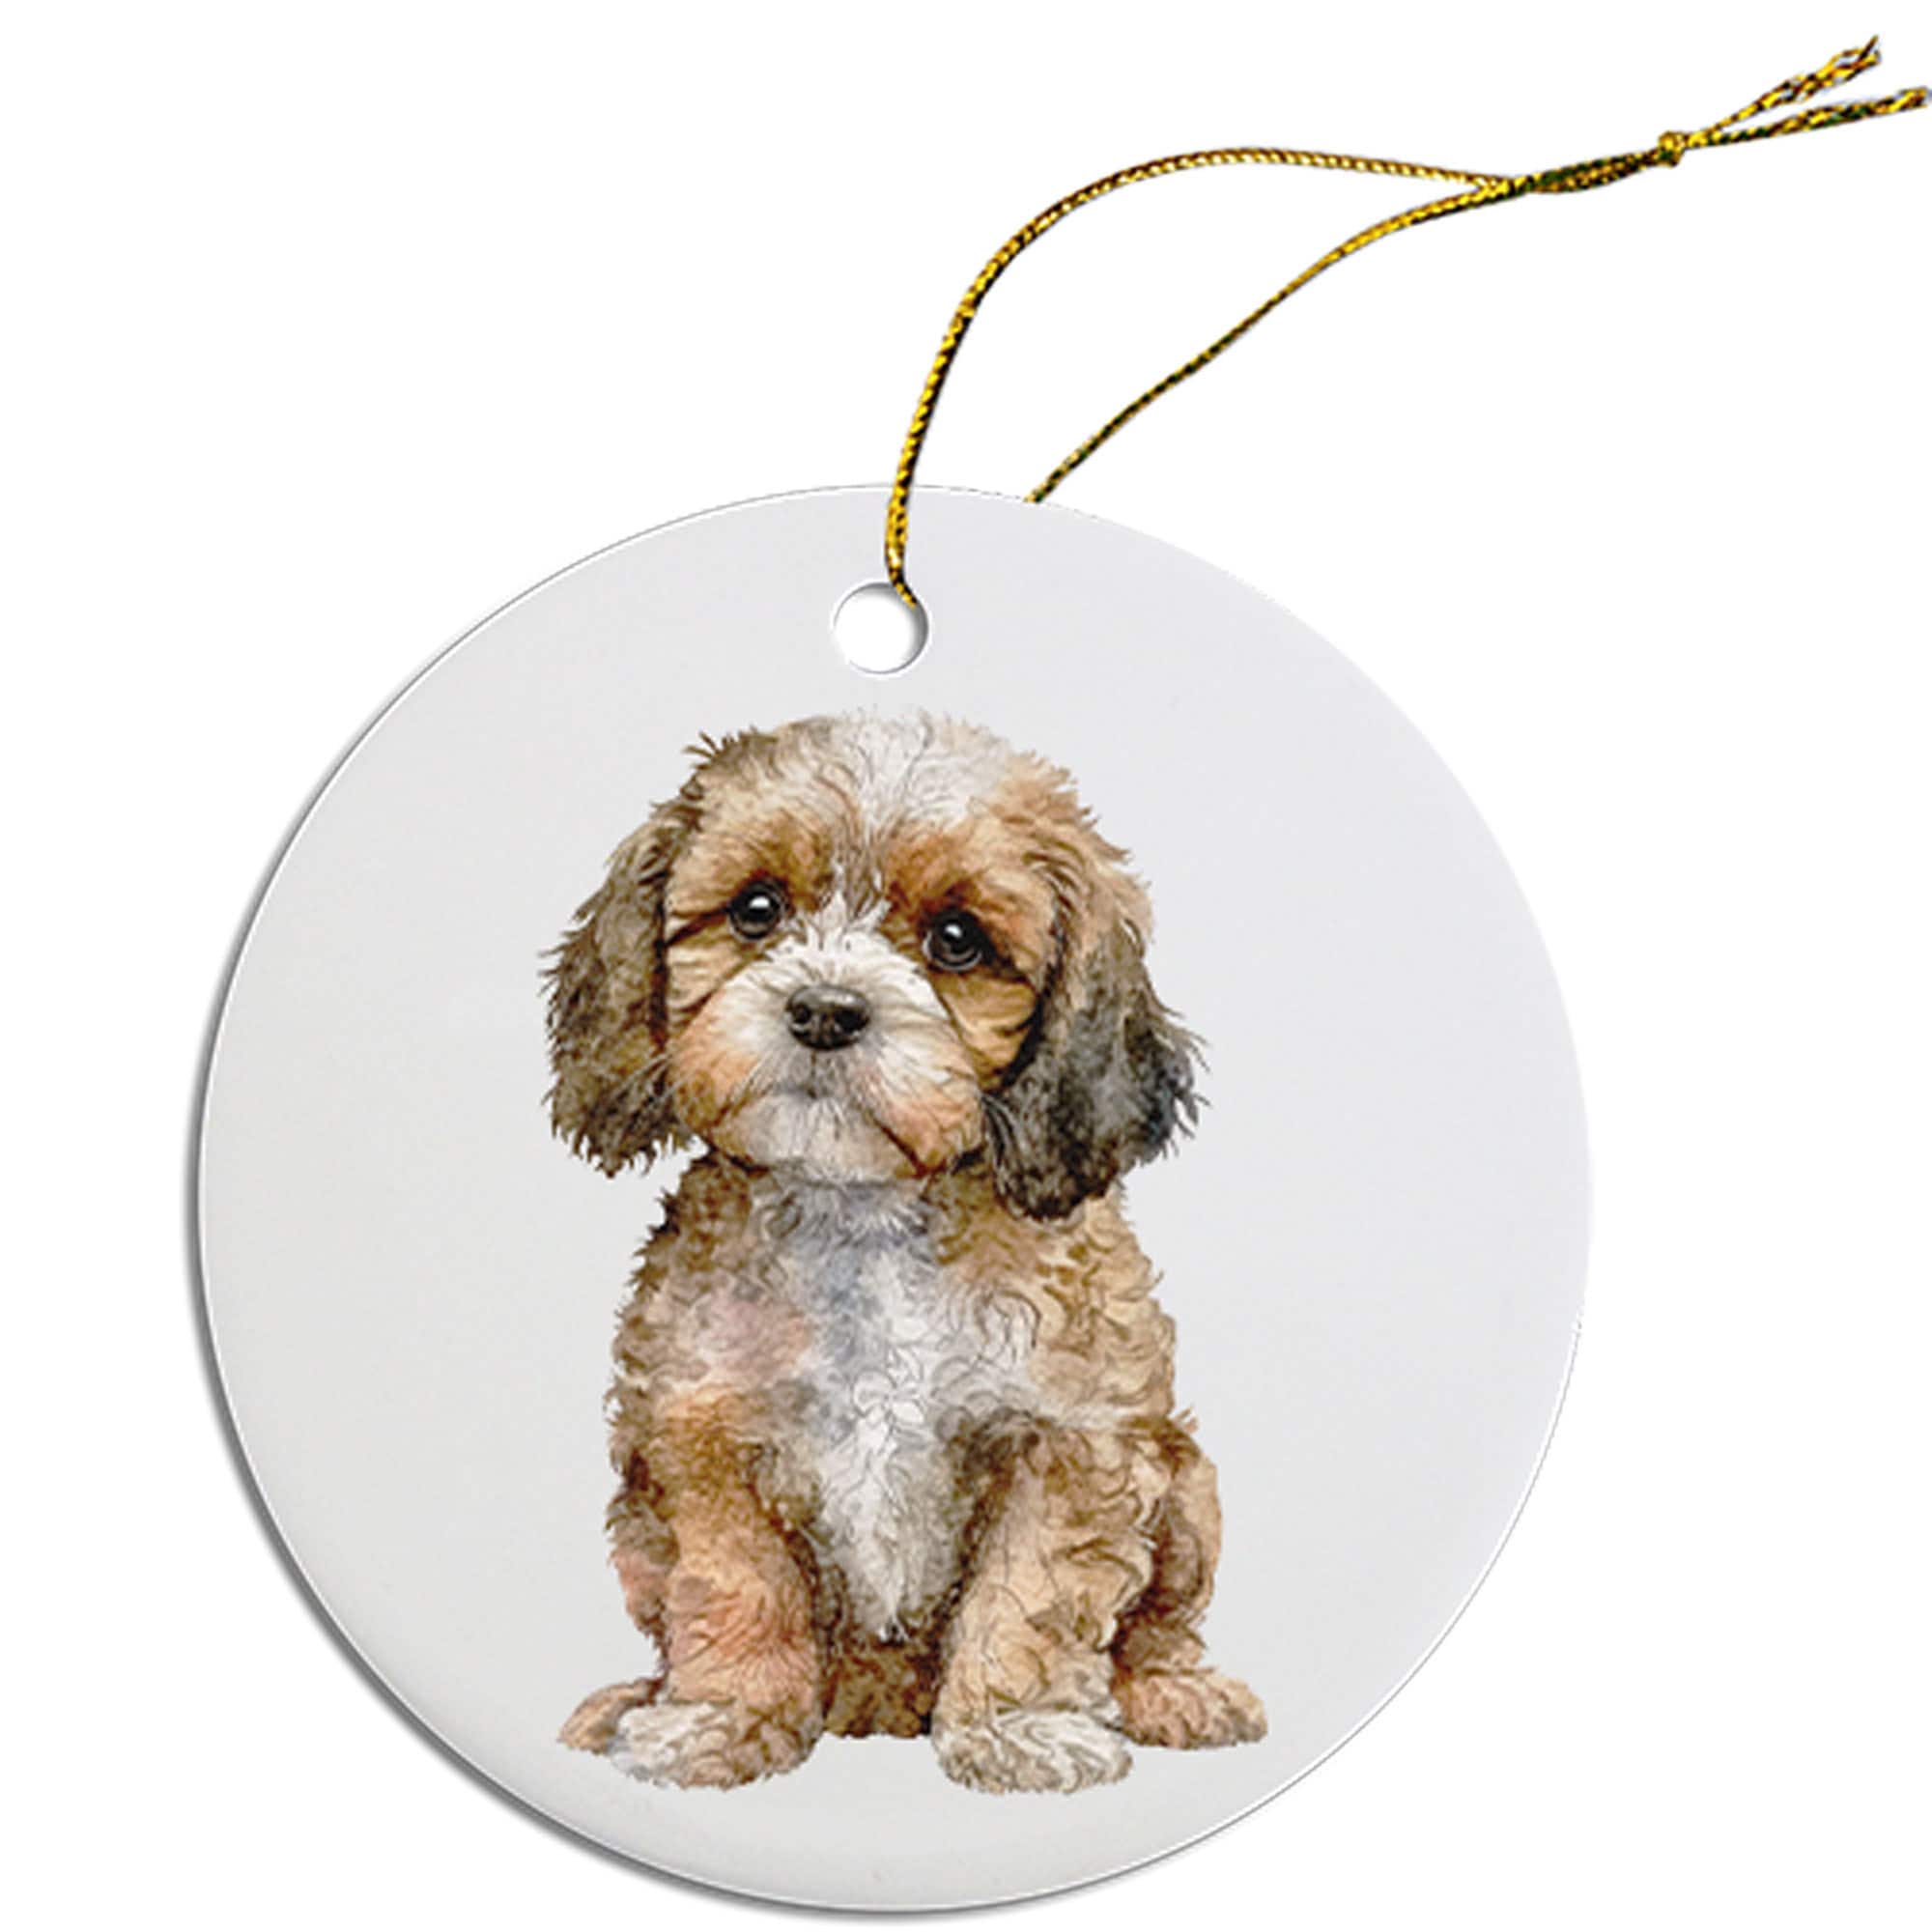 Dog Breed Specific Round Christmas Ornament, "Cavapoo"